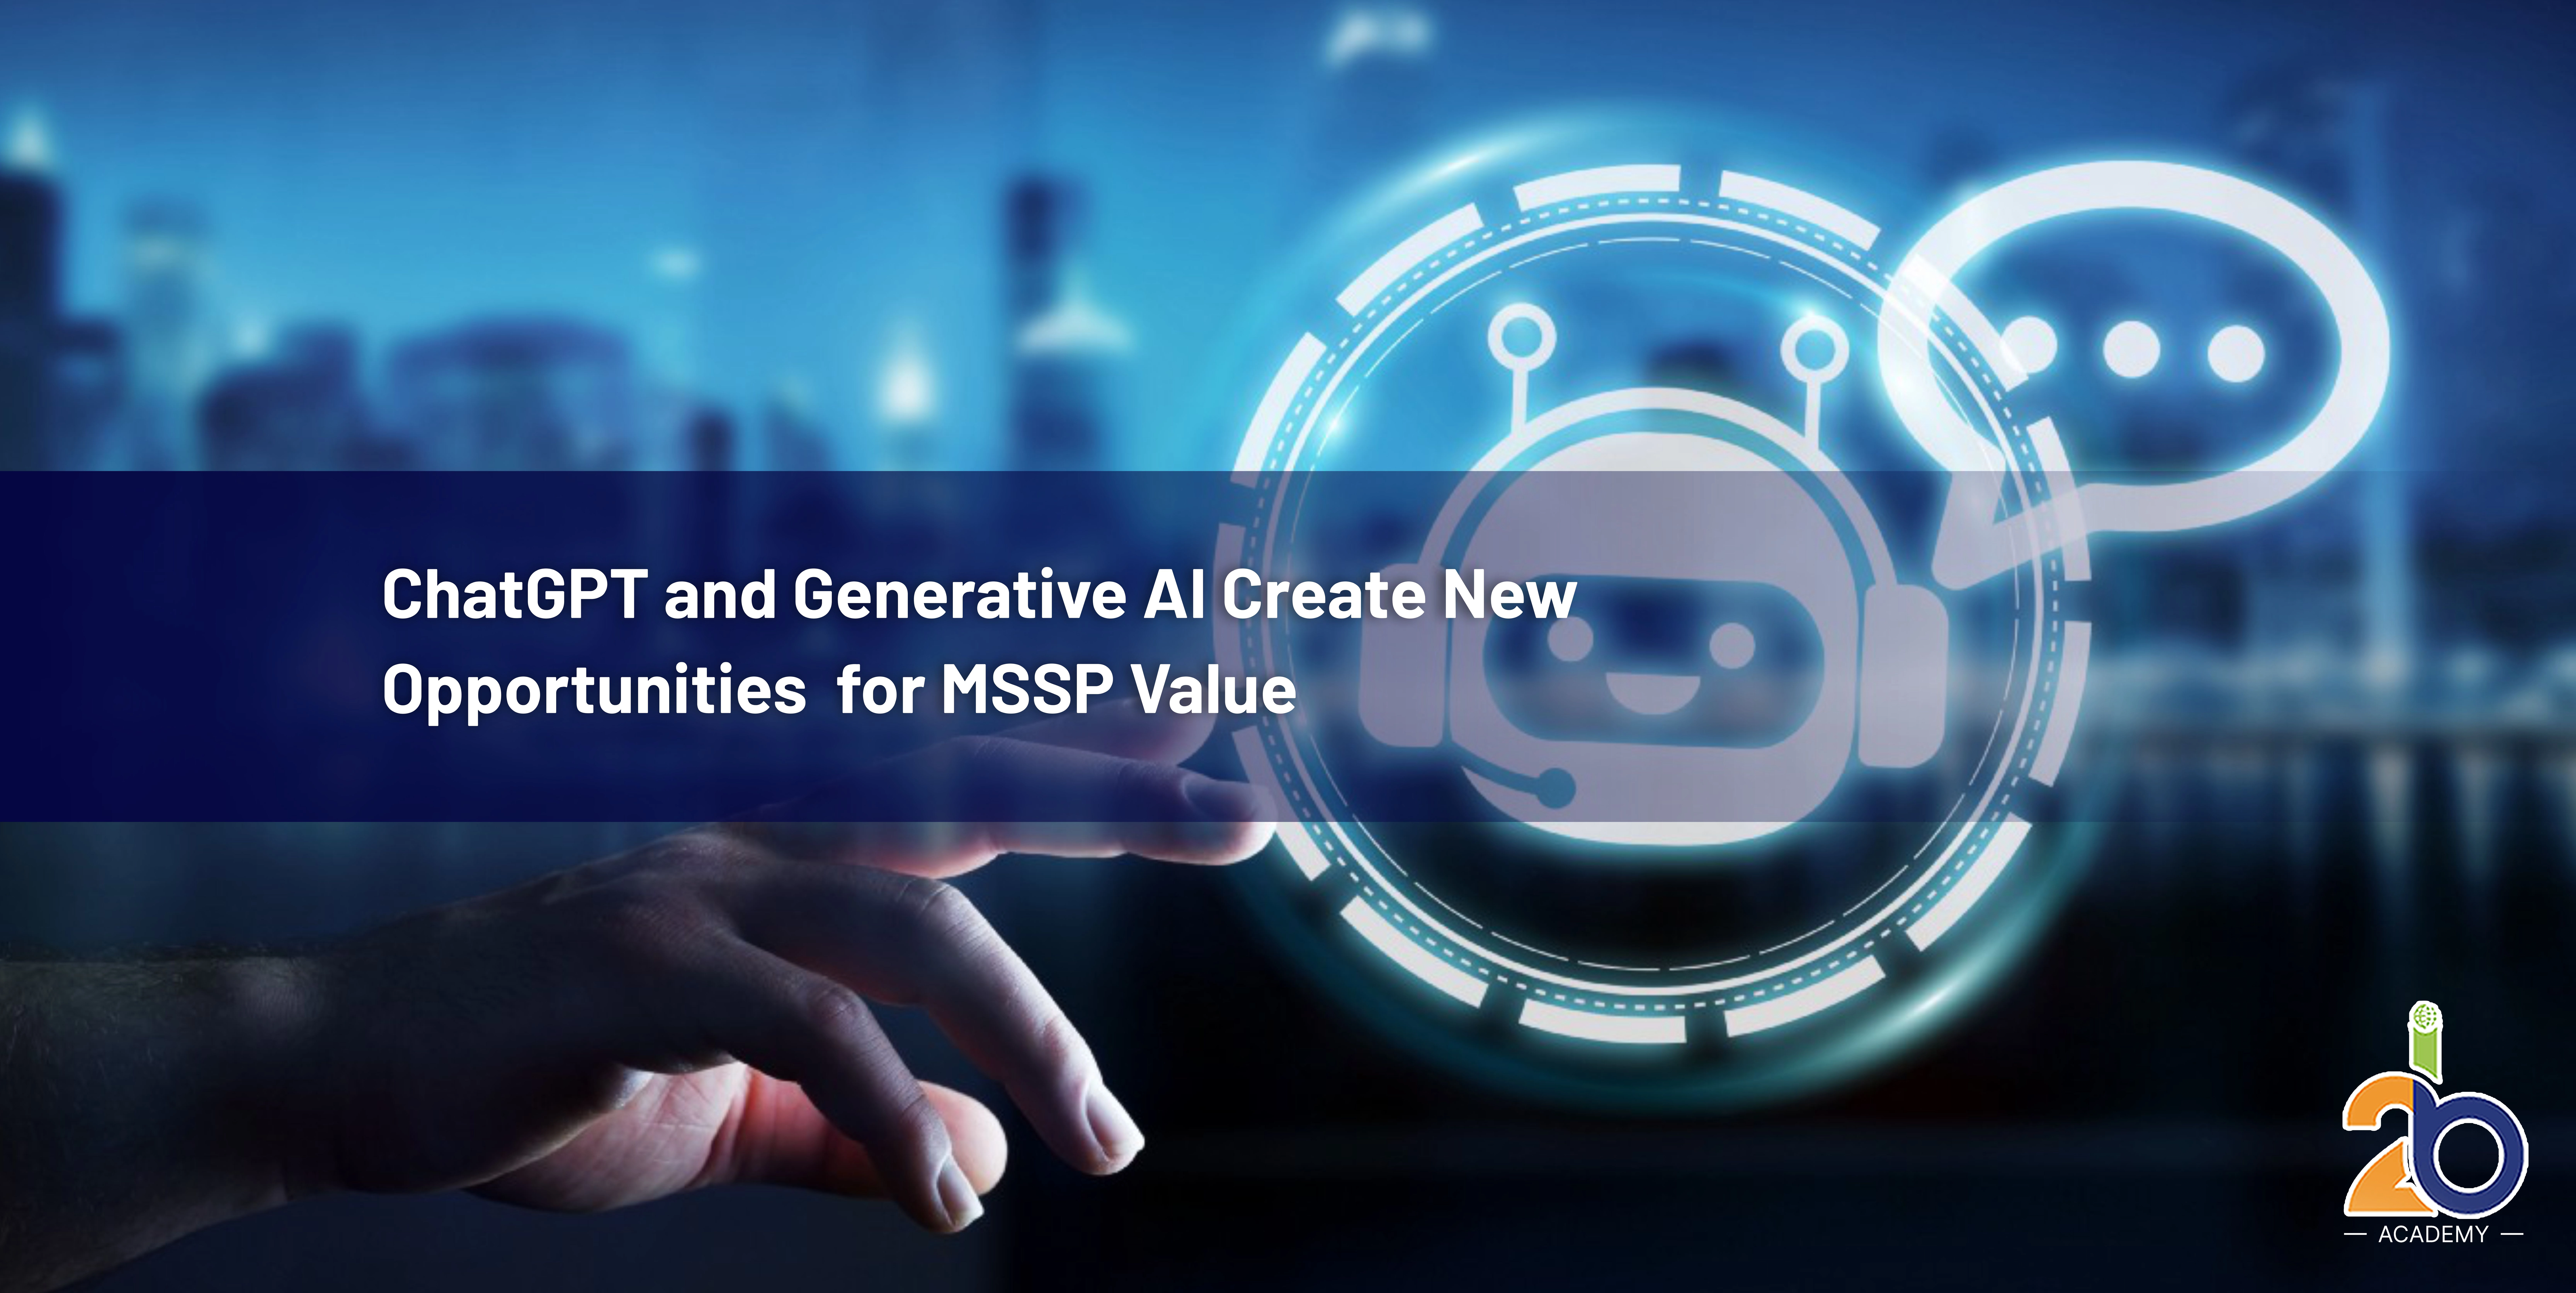 ChatGPT and Generative AI Create New Opportunities for MSSP Value